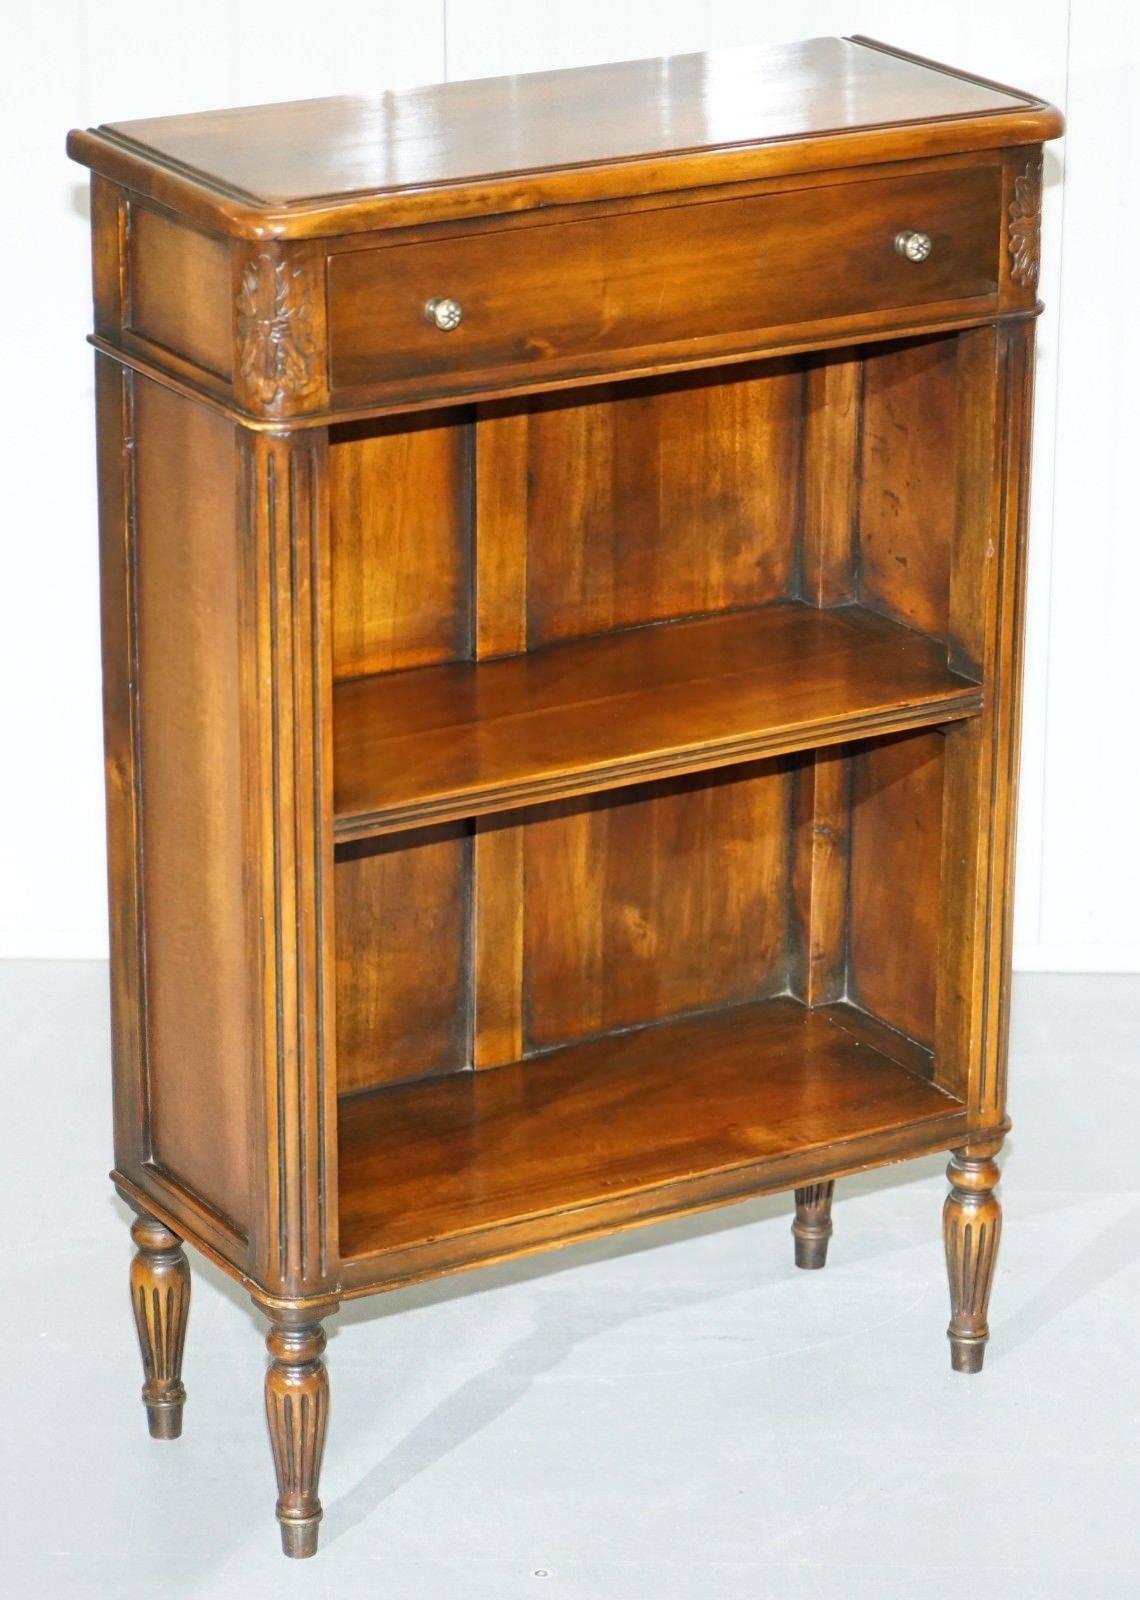 We are delighted to offer for sale this lovely matching pair of Theodore Alexander The Republic low bookcases with single drawers

Theodore Alexander is shaped by English Heritage handcrafts furniture and accessories for your home with